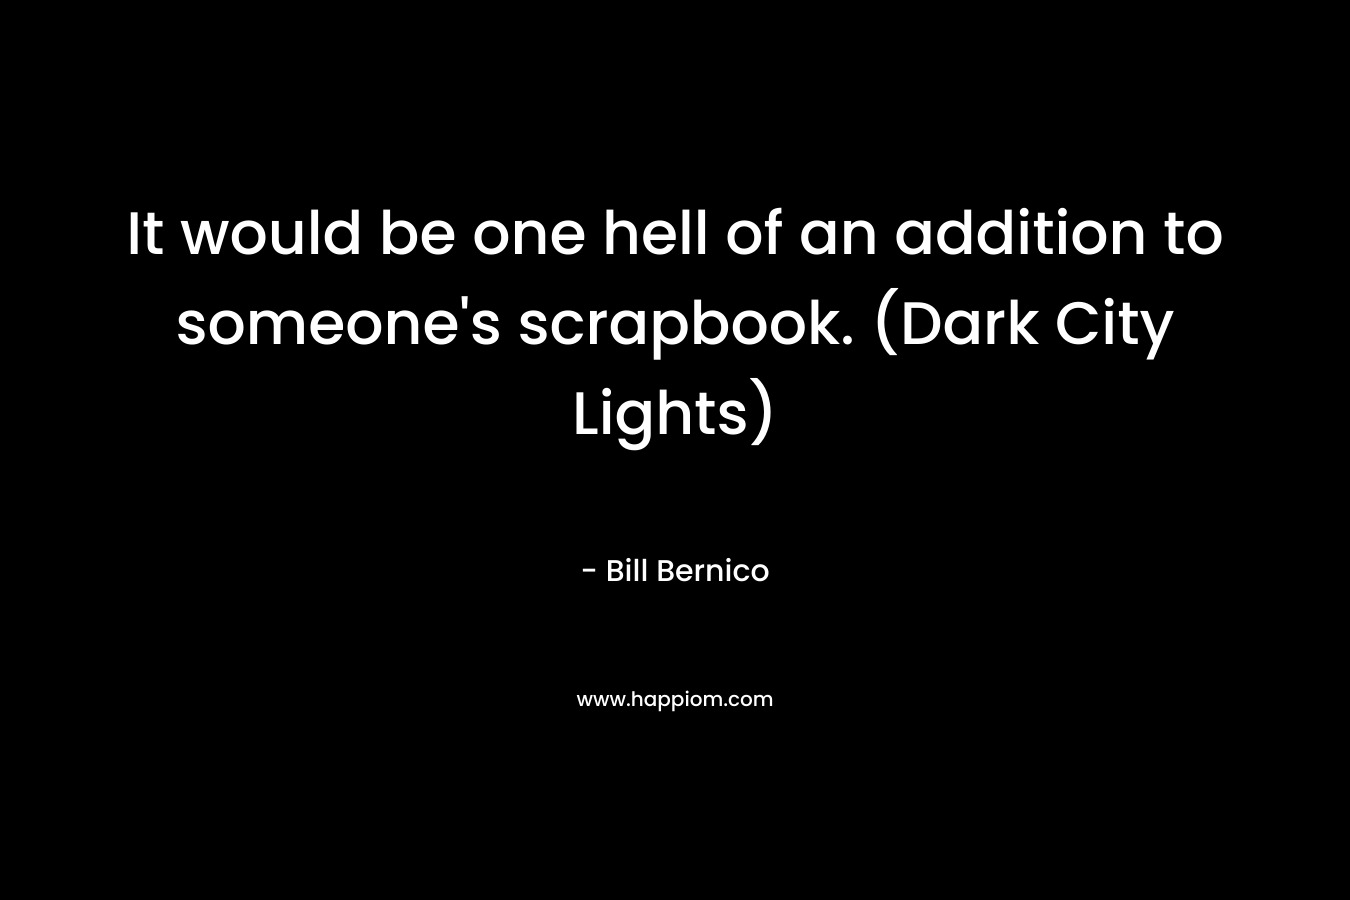 It would be one hell of an addition to someone's scrapbook. (Dark City Lights)